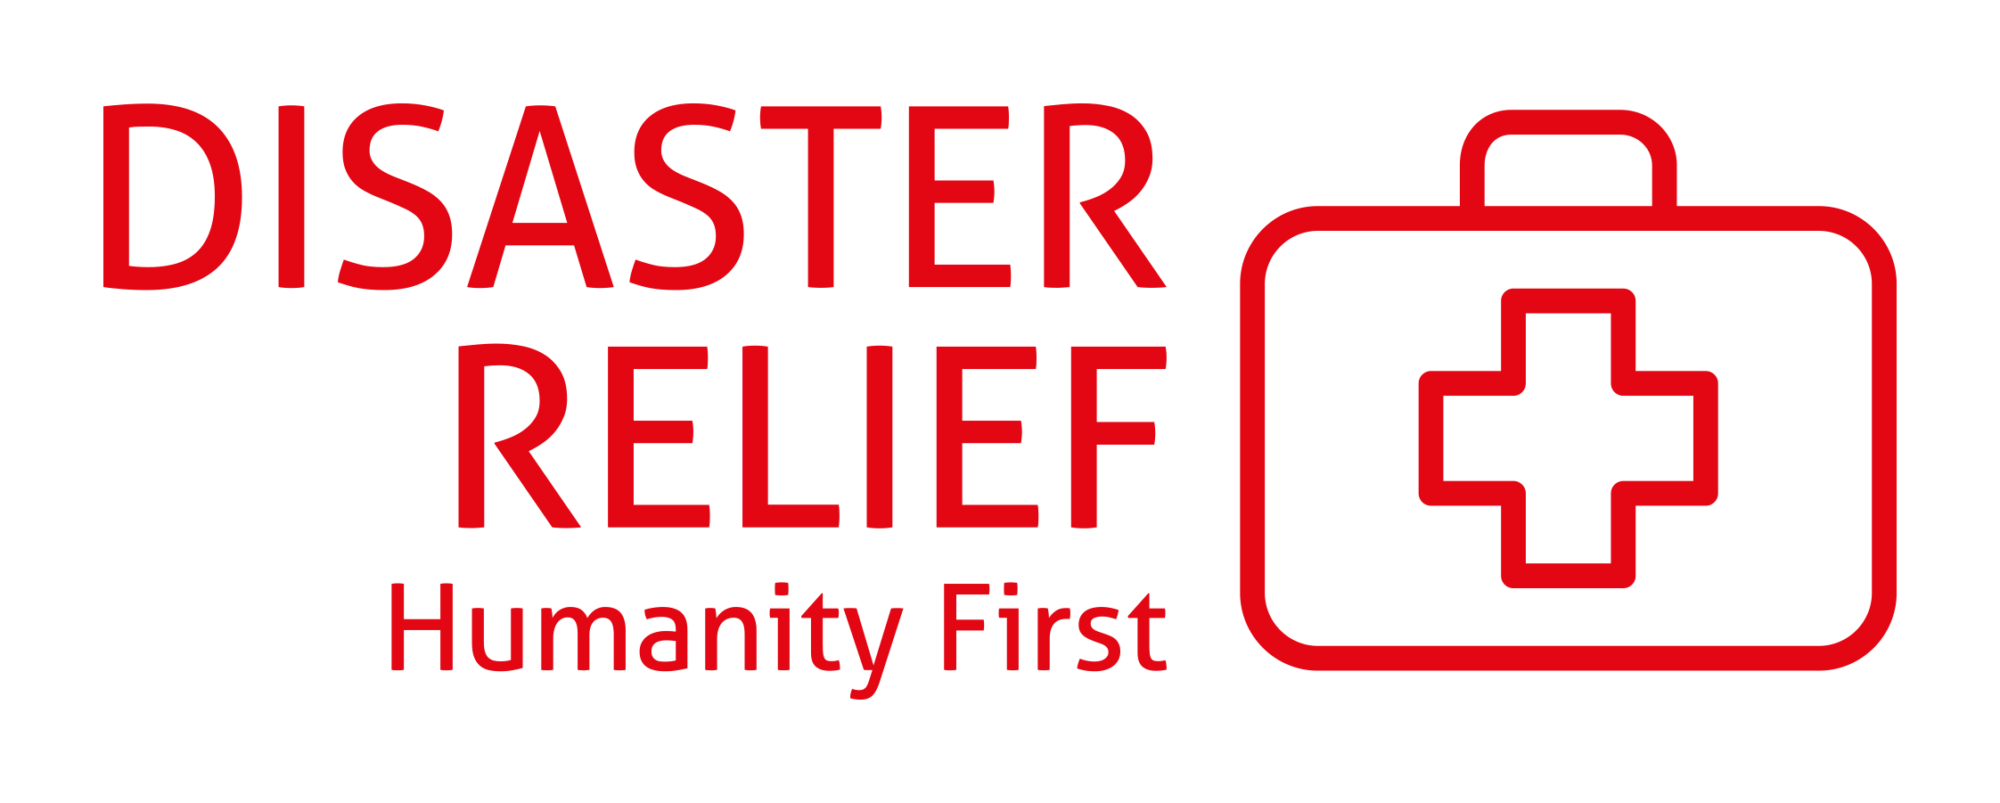 Humanity First Disaster Relief logo